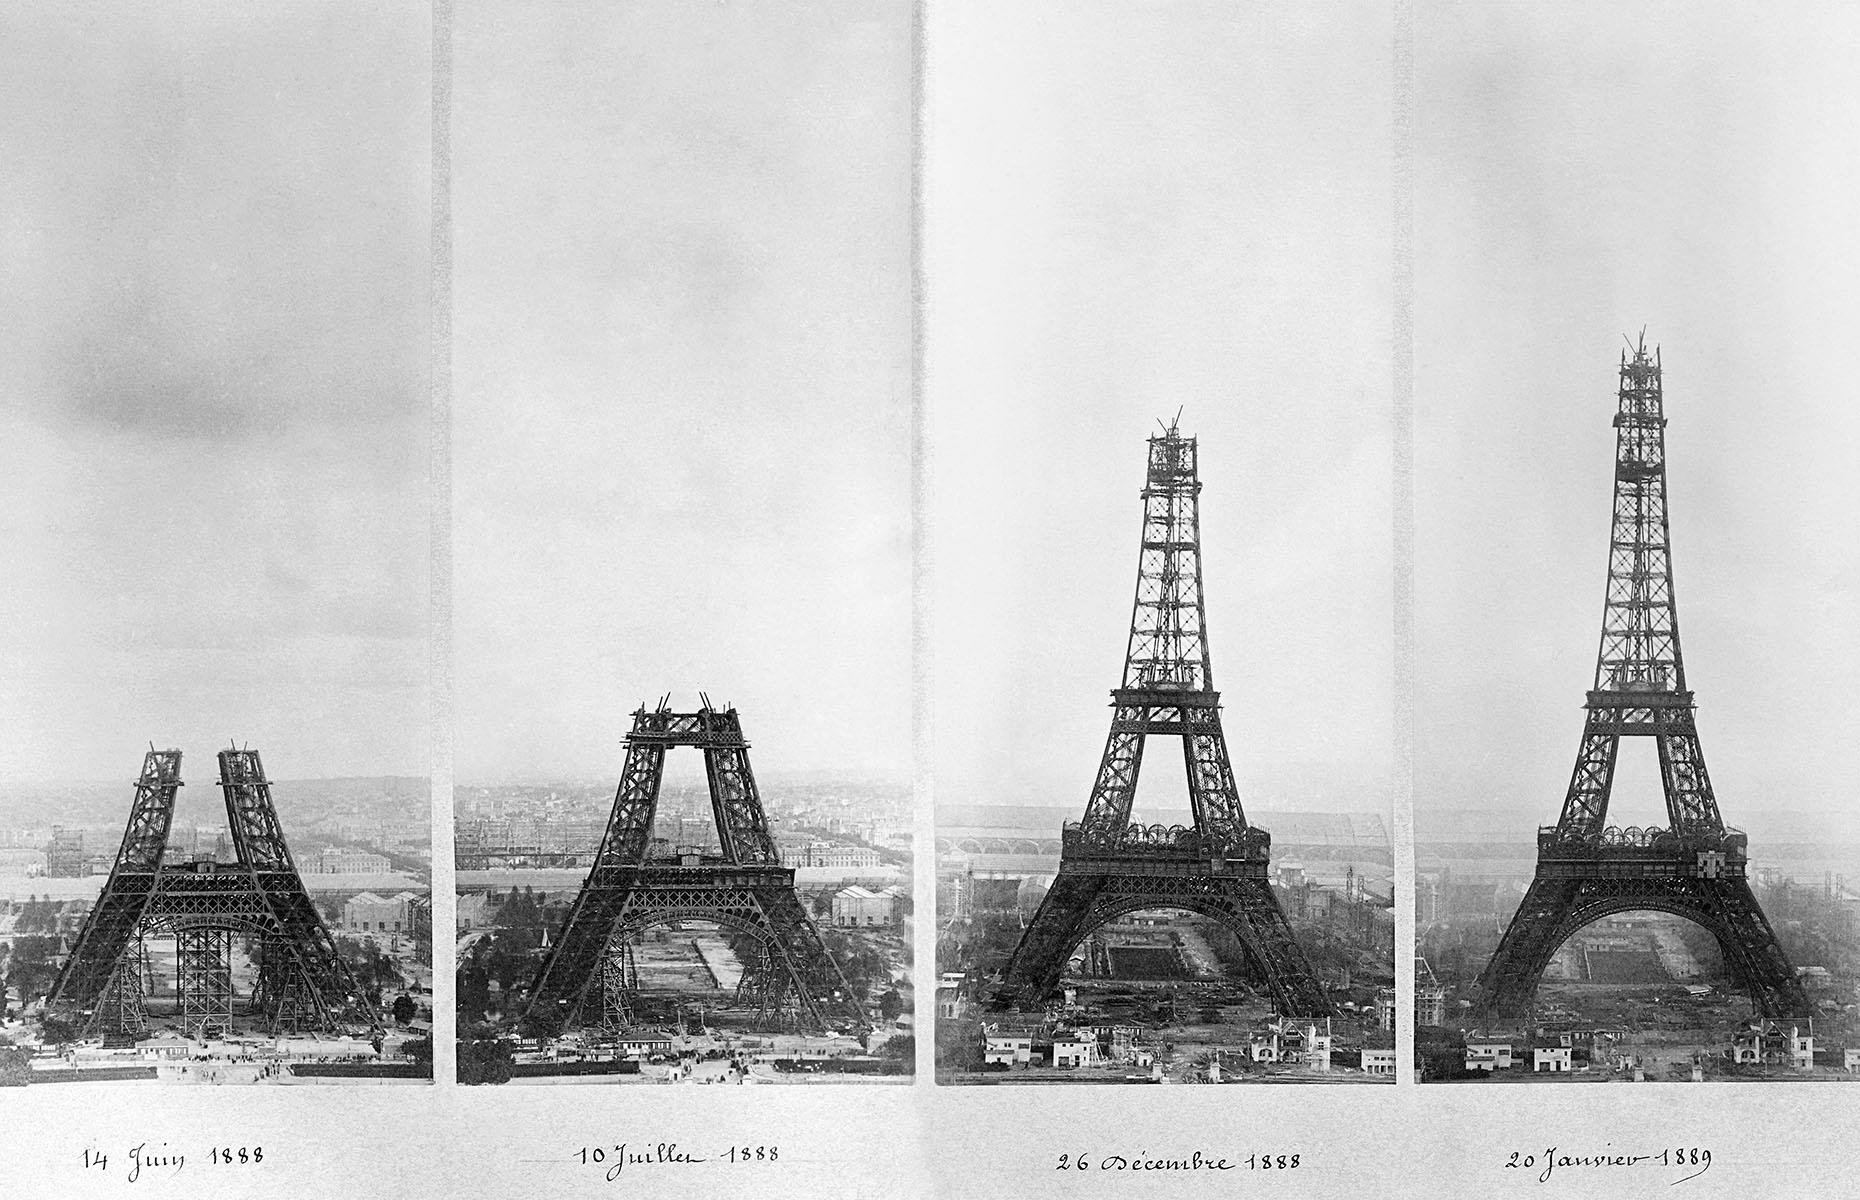 <p>Once the final go-ahead was given, the Eiffel Tower was built very quickly. Construction work began in January 1887 and was finished on 31 March 1889. It only took five months to build the foundations and 21 to finish assembling the metal pieces of the tower. Journalist Emile Goudeau visited the site in 1889 and described it as such: “A thick cloud of tar and coal smoke seized the throat, and we were deafened by the din of metal screaming beneath the hammer.”</p>